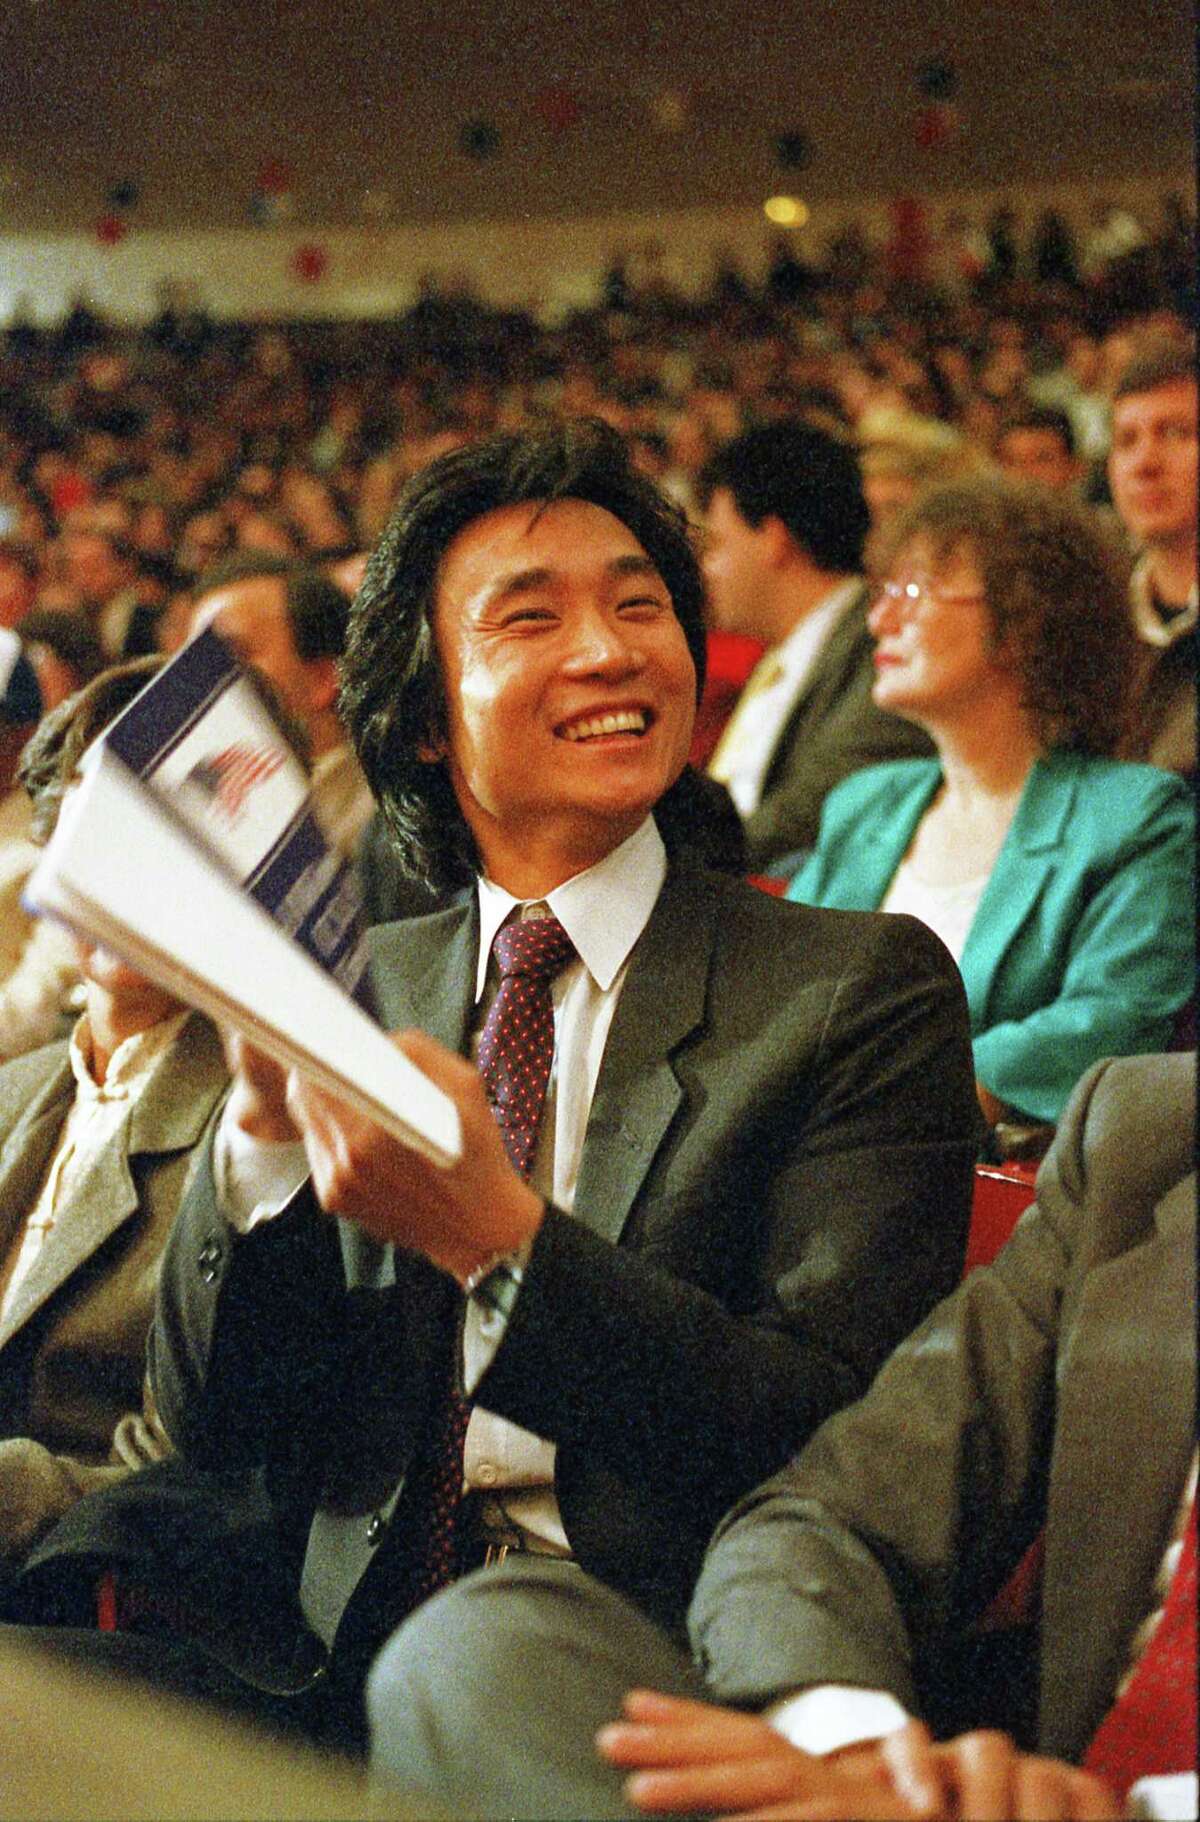 12/19/1986 - Houston Ballet dancer Li Cunxin is one of 4,200 Houston-area people sworn-in as American citizens at Hofheinz Pavilion in the largest-ever naturalization ceremony in Texas.